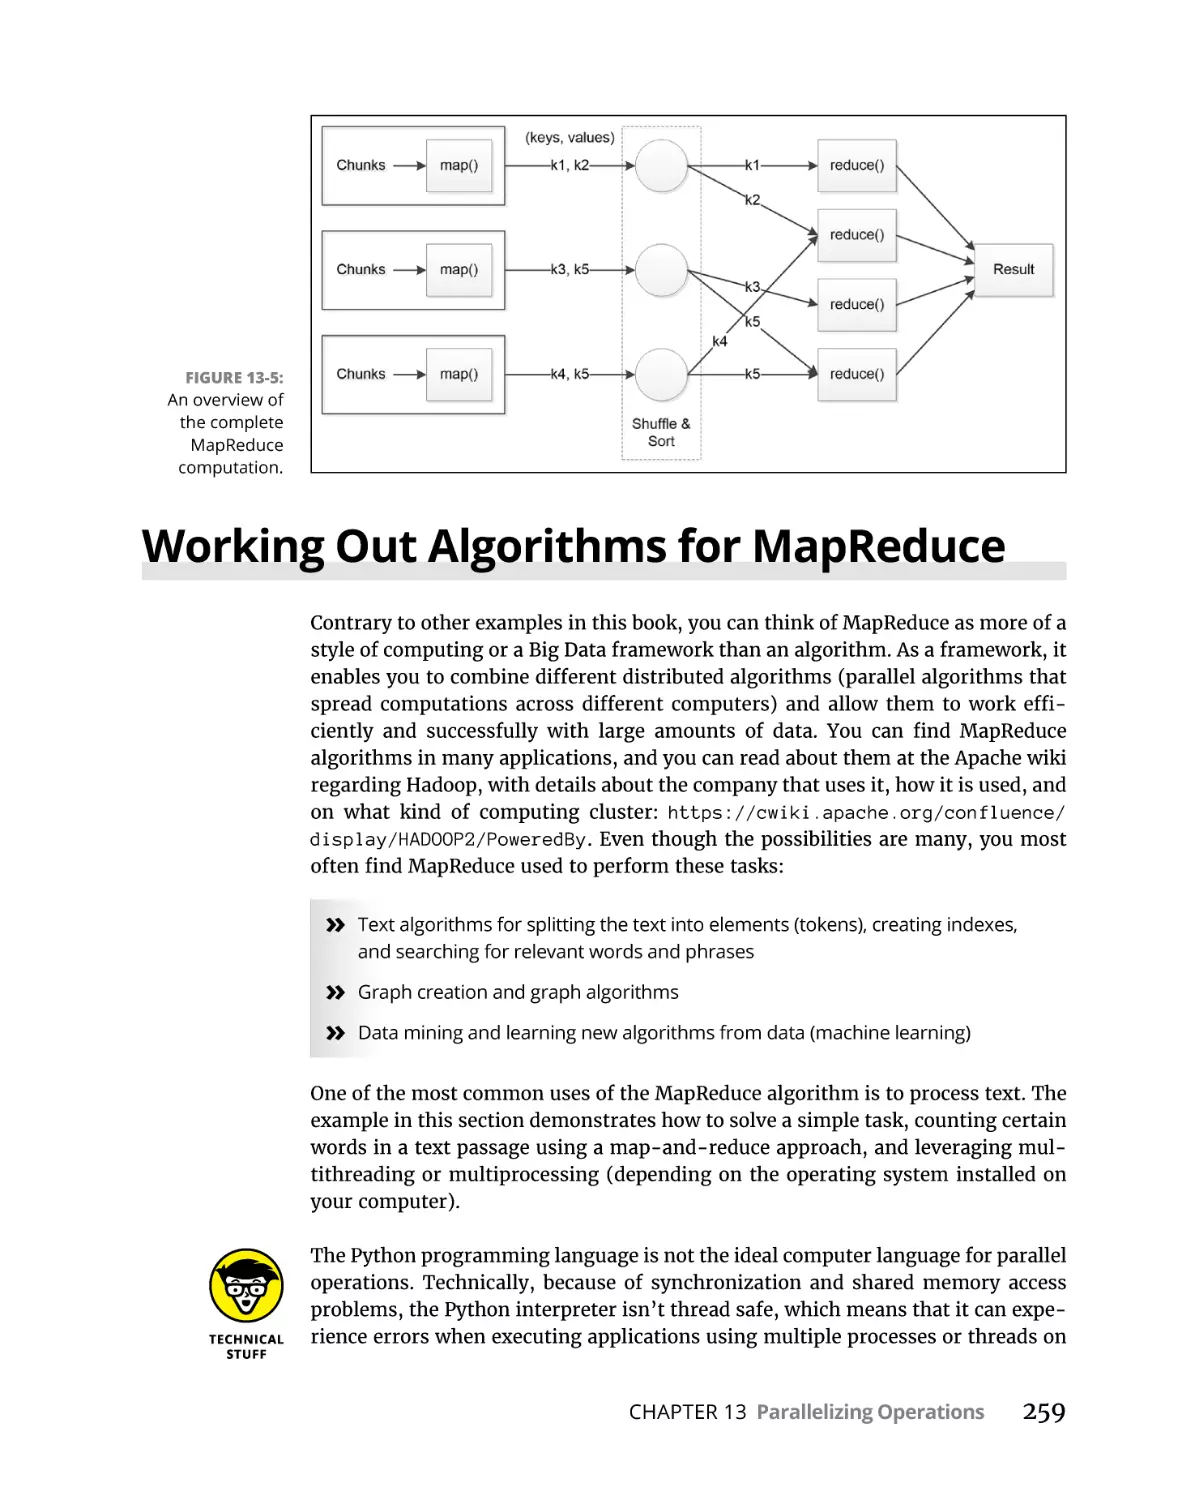 Working Out Algorithms for MapReduce